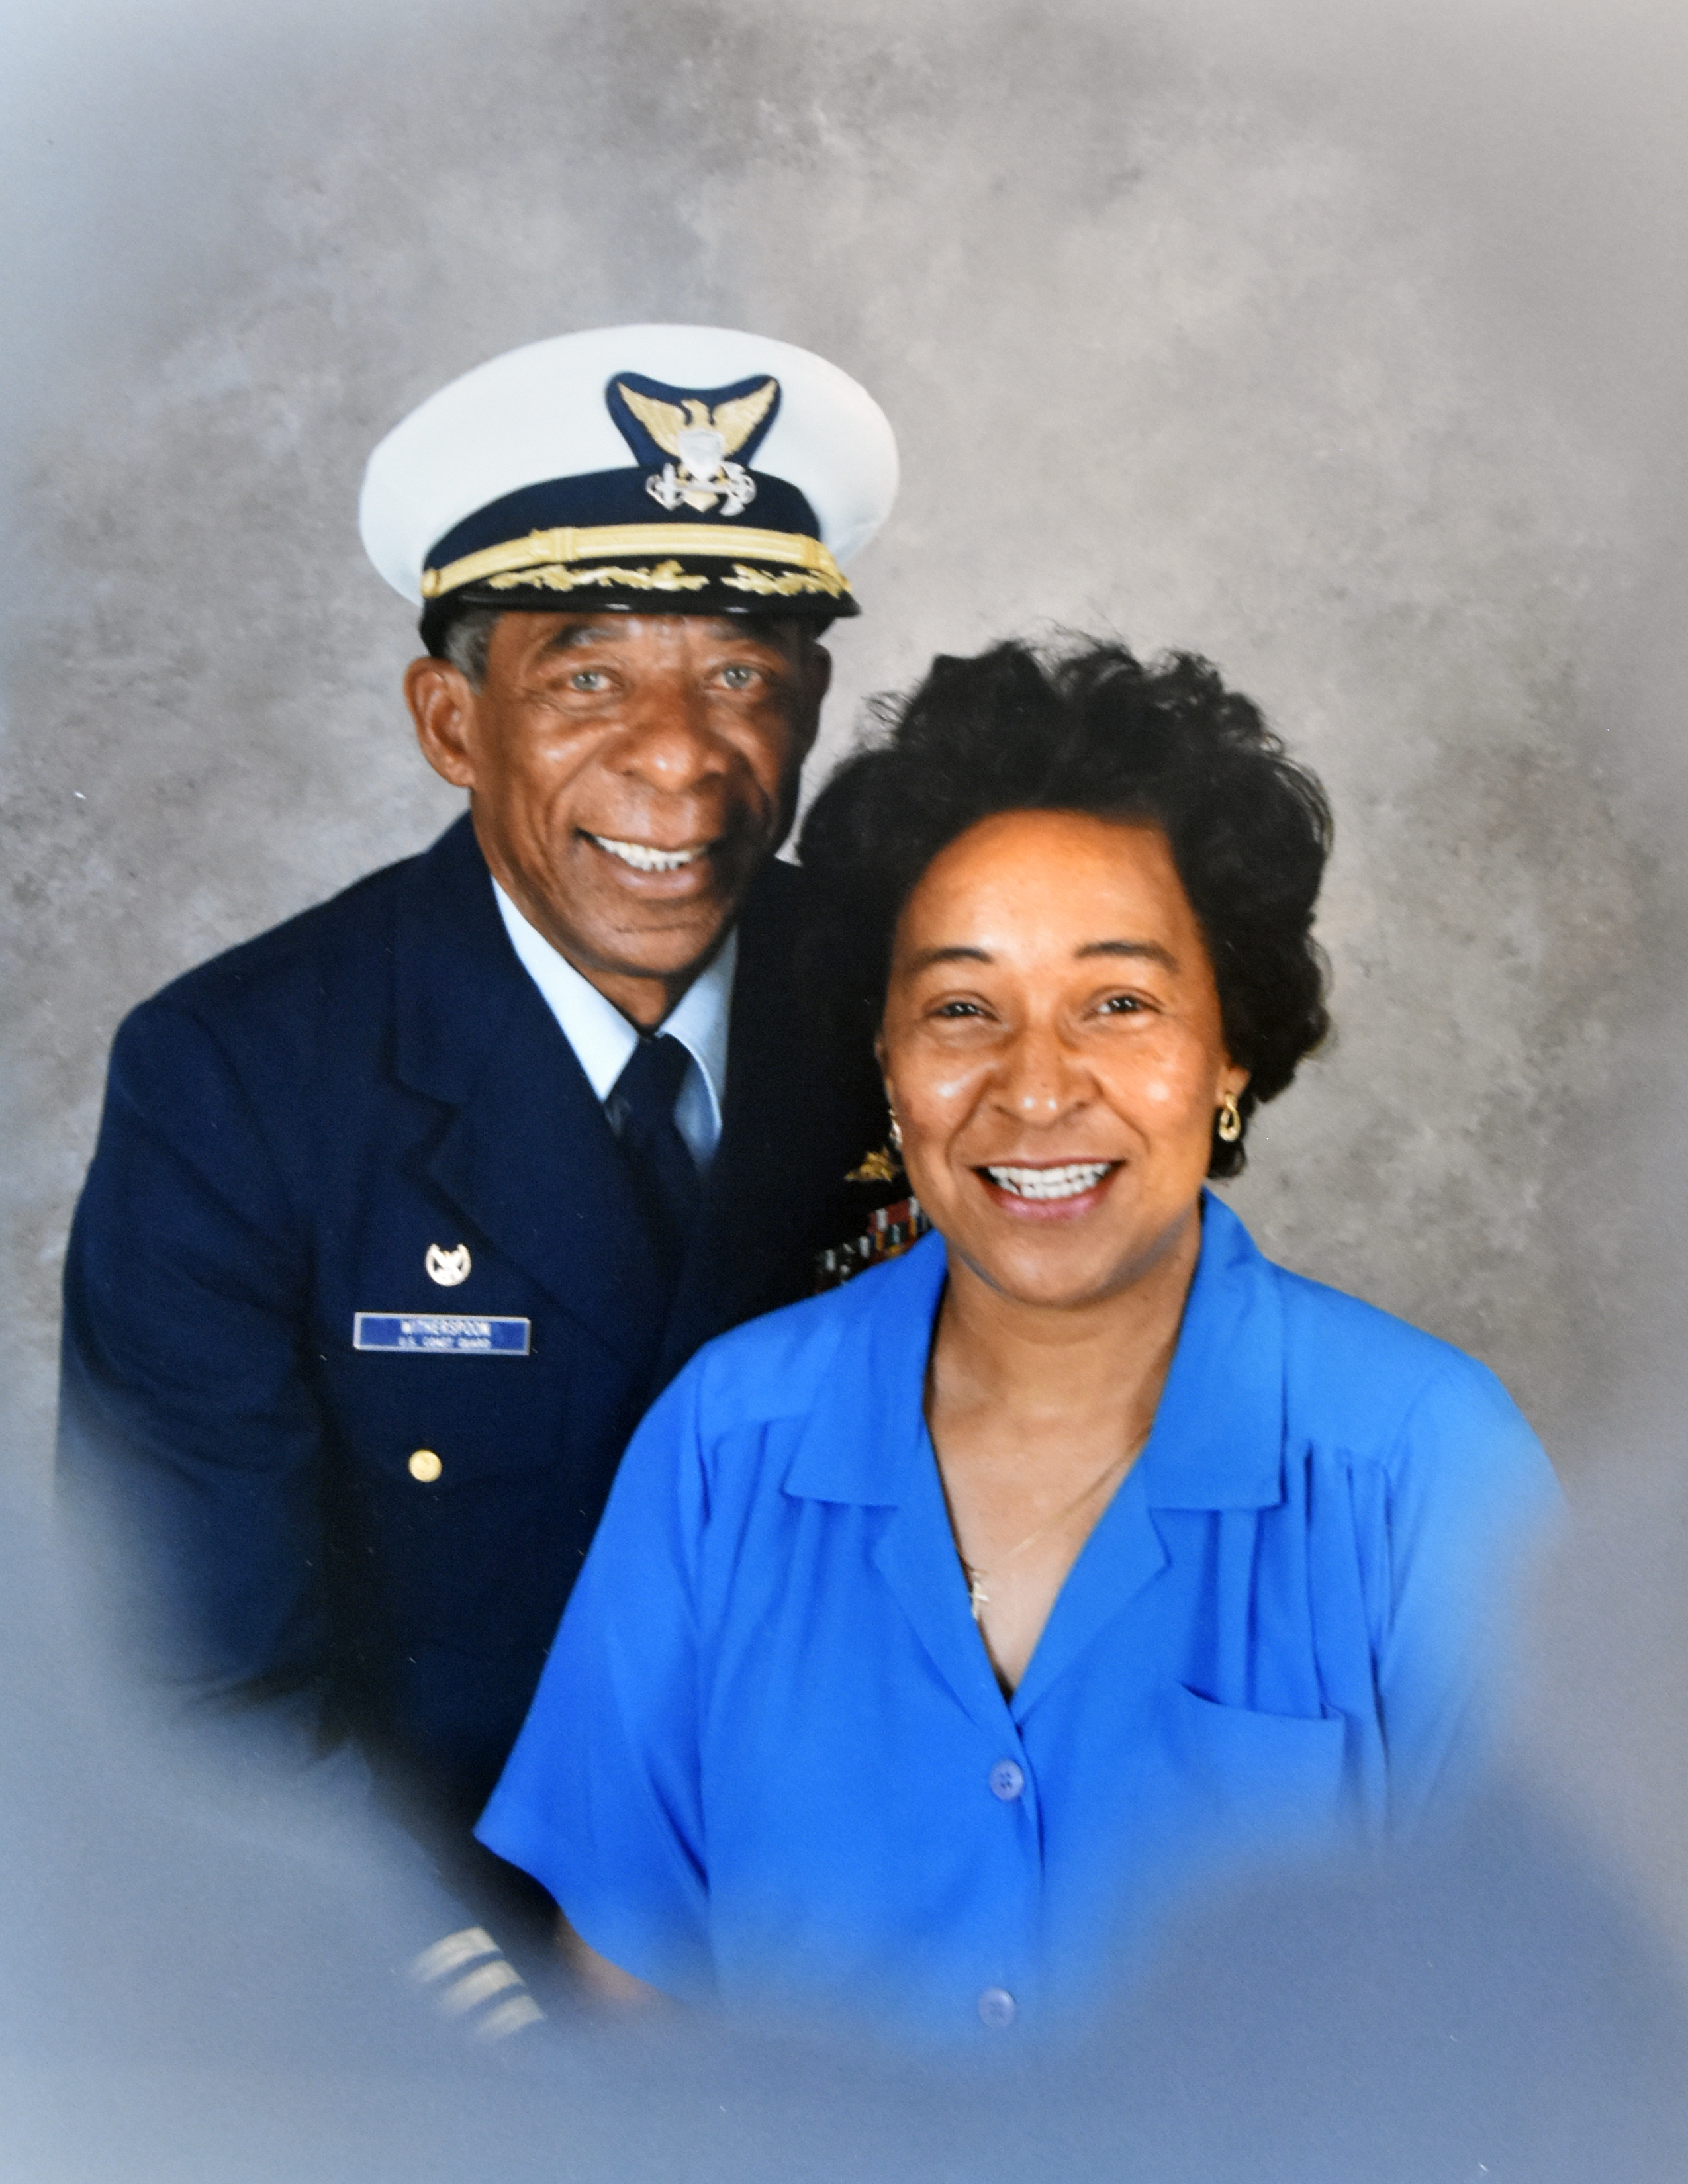 John and Carol Witherspoon pose for a photograph near the conclusion of the captain’s distinguished career. (Courtesy of the Mariners’ Museum)